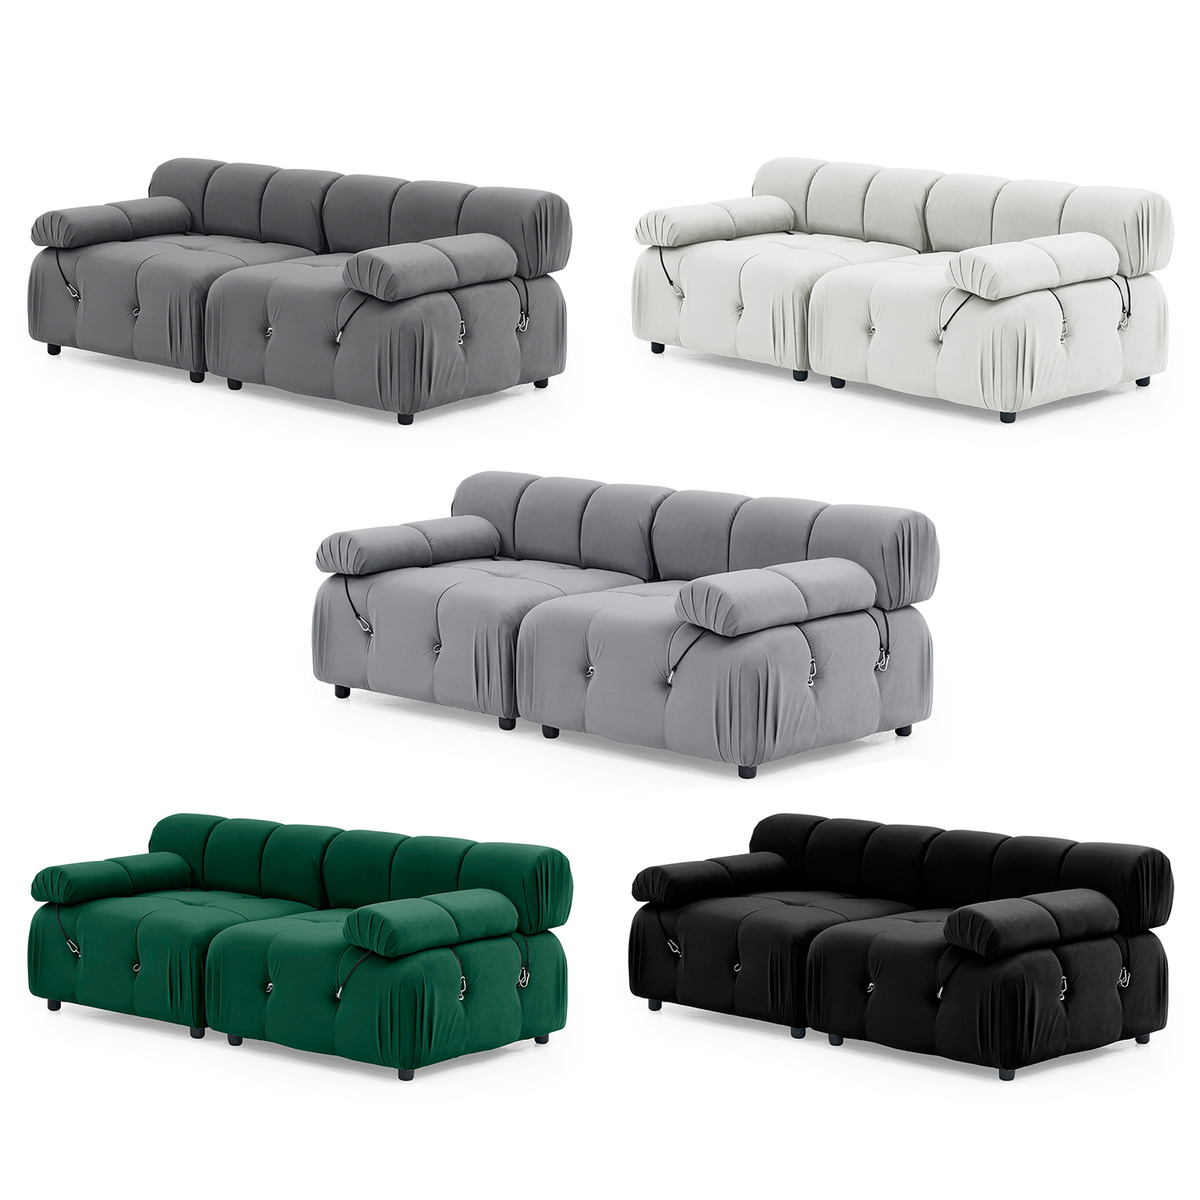 Foret 2 Seater Sofa Modular Arm Seat Tufted Velvet Lounge Couch Chaise 5 Colors